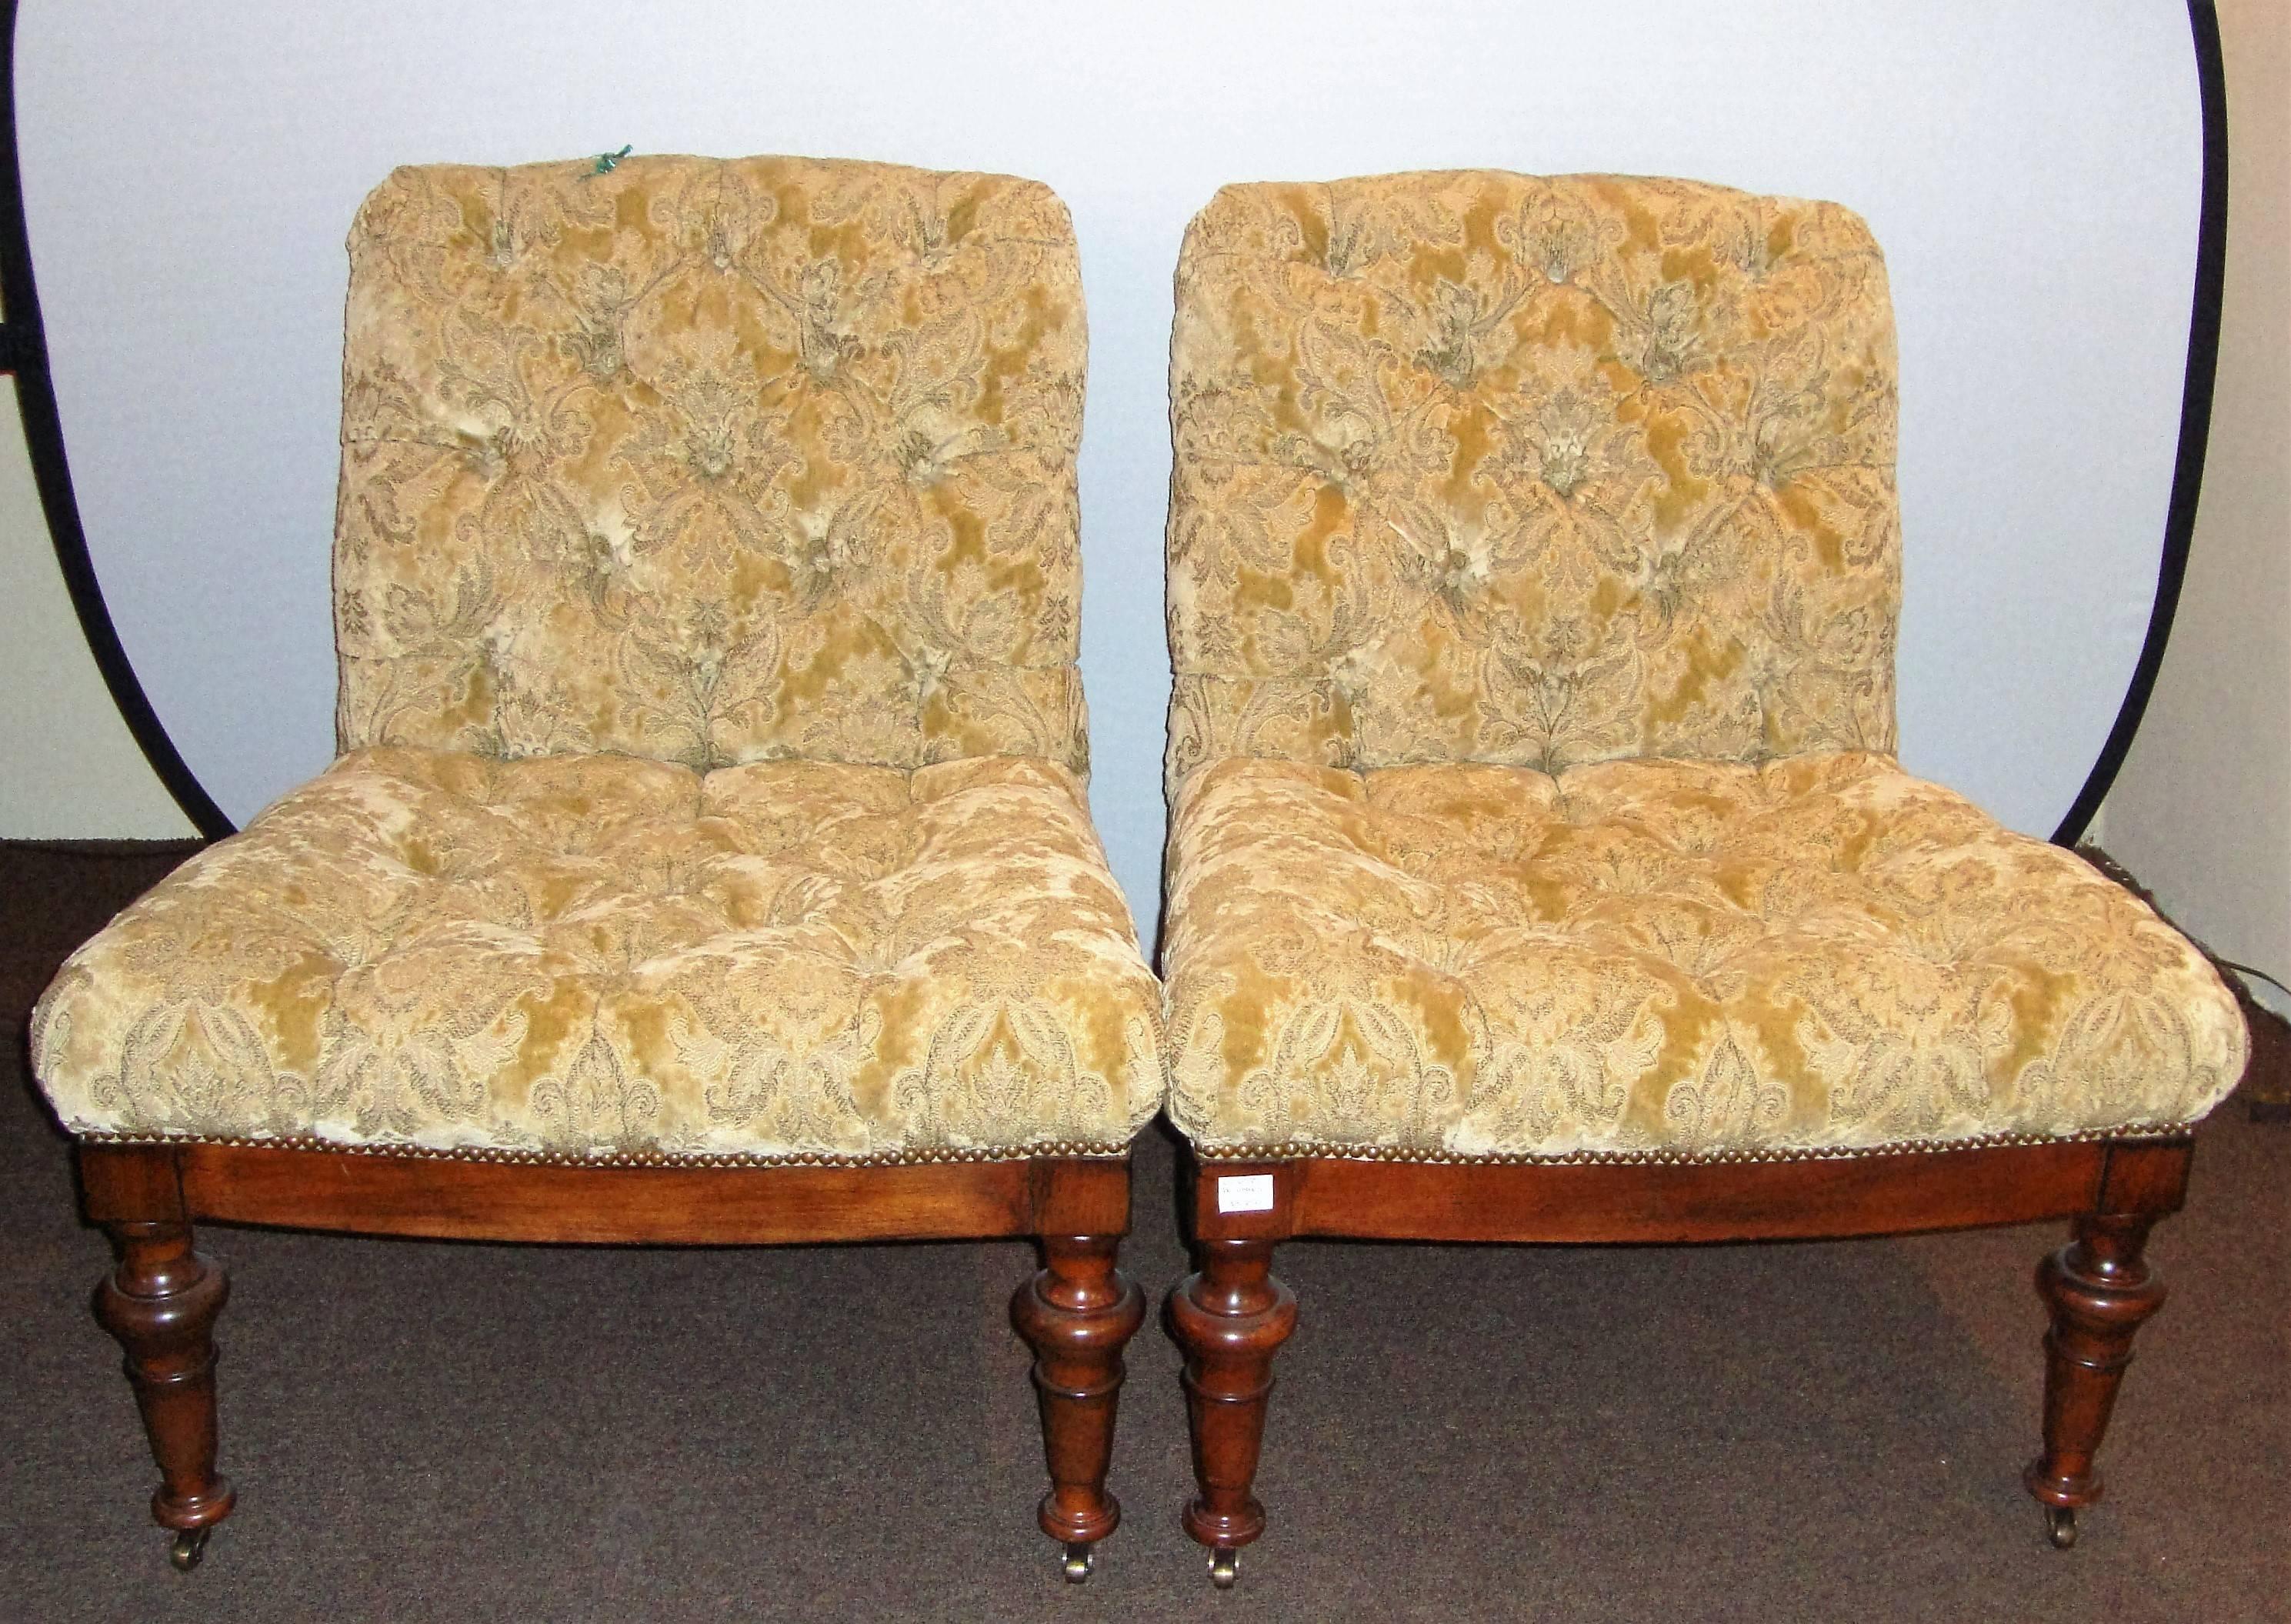 A pair of Edward Ferrell chairs sitting on a Victorian frames. These tufted, made in fine fabric velvet chairs is idyllic in its Classic shape. It is boldly postured as a stylish complementary piece for your room, its walnut legs sitting on wheels